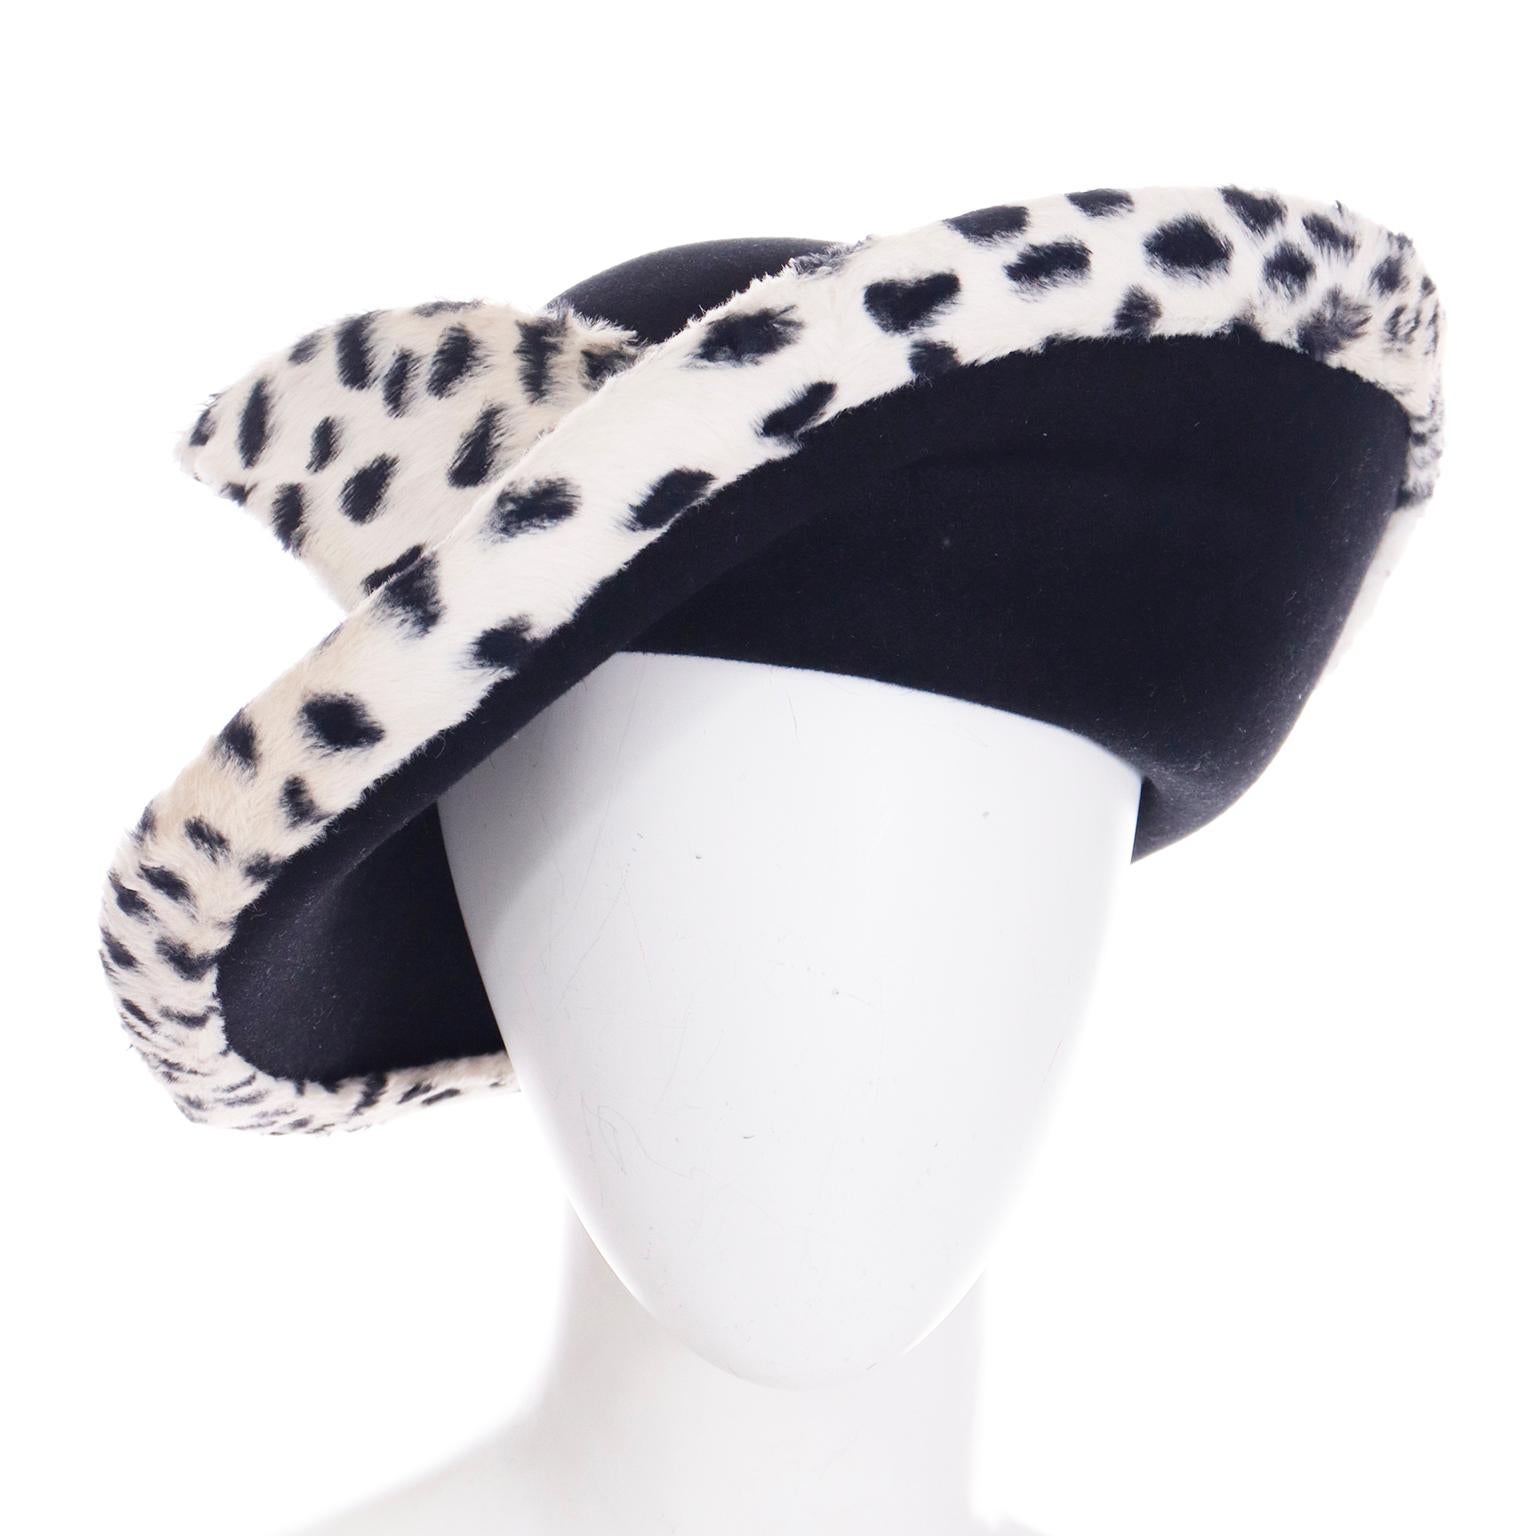 We always love finding vintage Oscar de la Renta hats! His hats are always well made and we especially appreciate the unique style, details and fabrics that make them stand out. This vintage black and white wool faux fur hat has dramatic snow